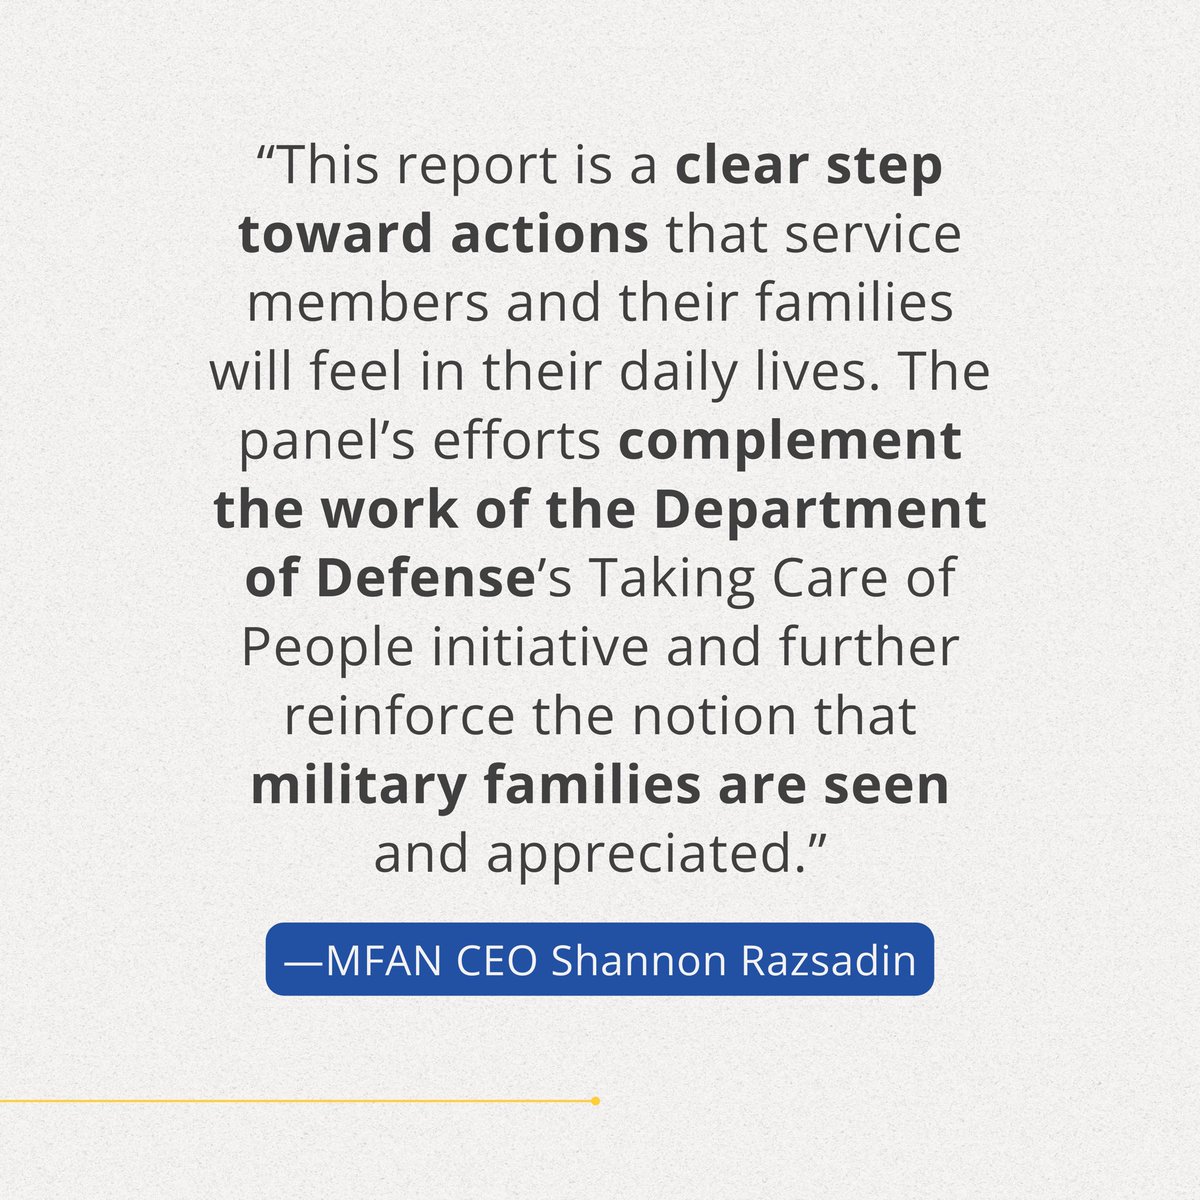 ICYMI: A Congressional panel led by @DonBaconNE02 & @RepHoulahan is pushing for better military pay, child care, health care, housing, and spouse support. Read the report here: mfan.org/blog/quality-o…